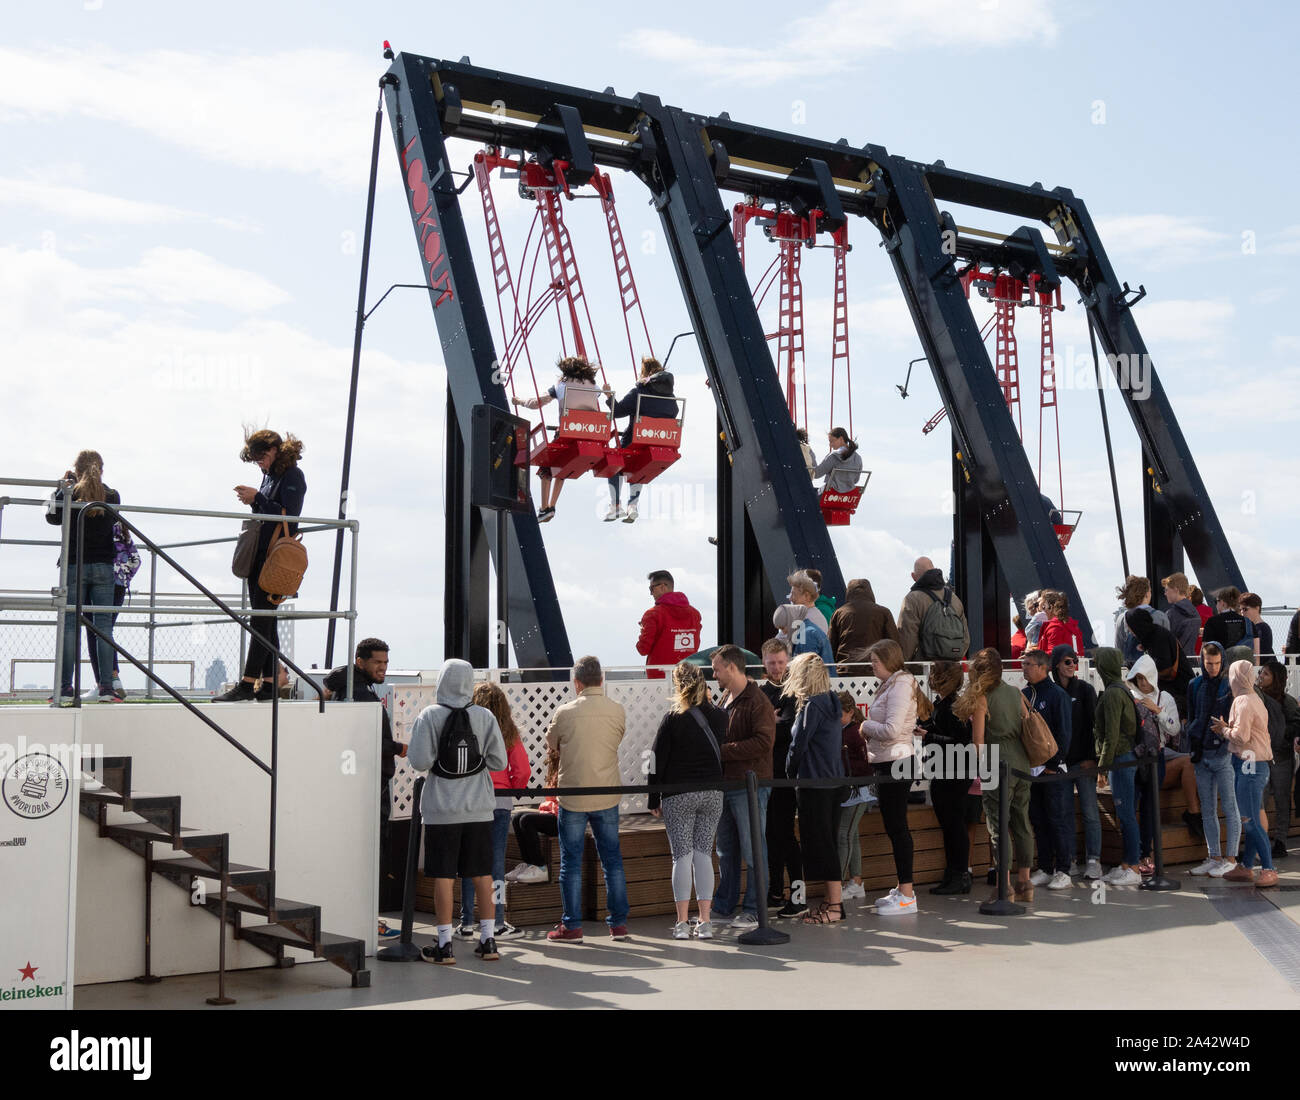 Tourists enjoy the "over the edge" swings on the A'DAM Lookout Tower in  Amsterdam Noord. Europe's highest swing is 100 meters above the ground  Stock Photo - Alamy